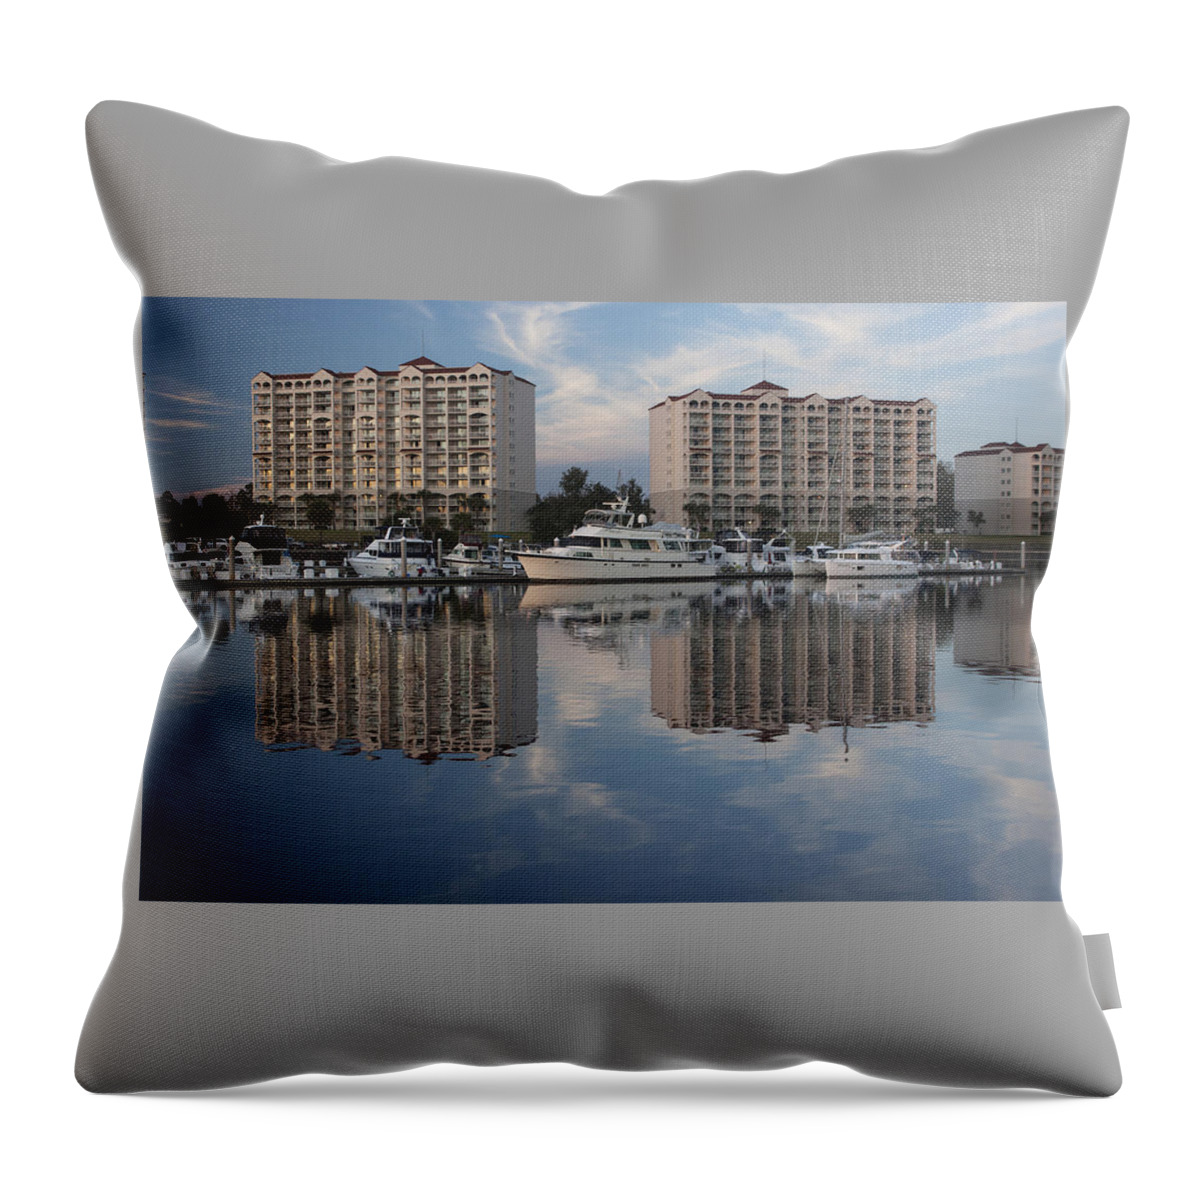 Photograph Throw Pillow featuring the photograph Lifestyle Reflections by Suzanne Gaff